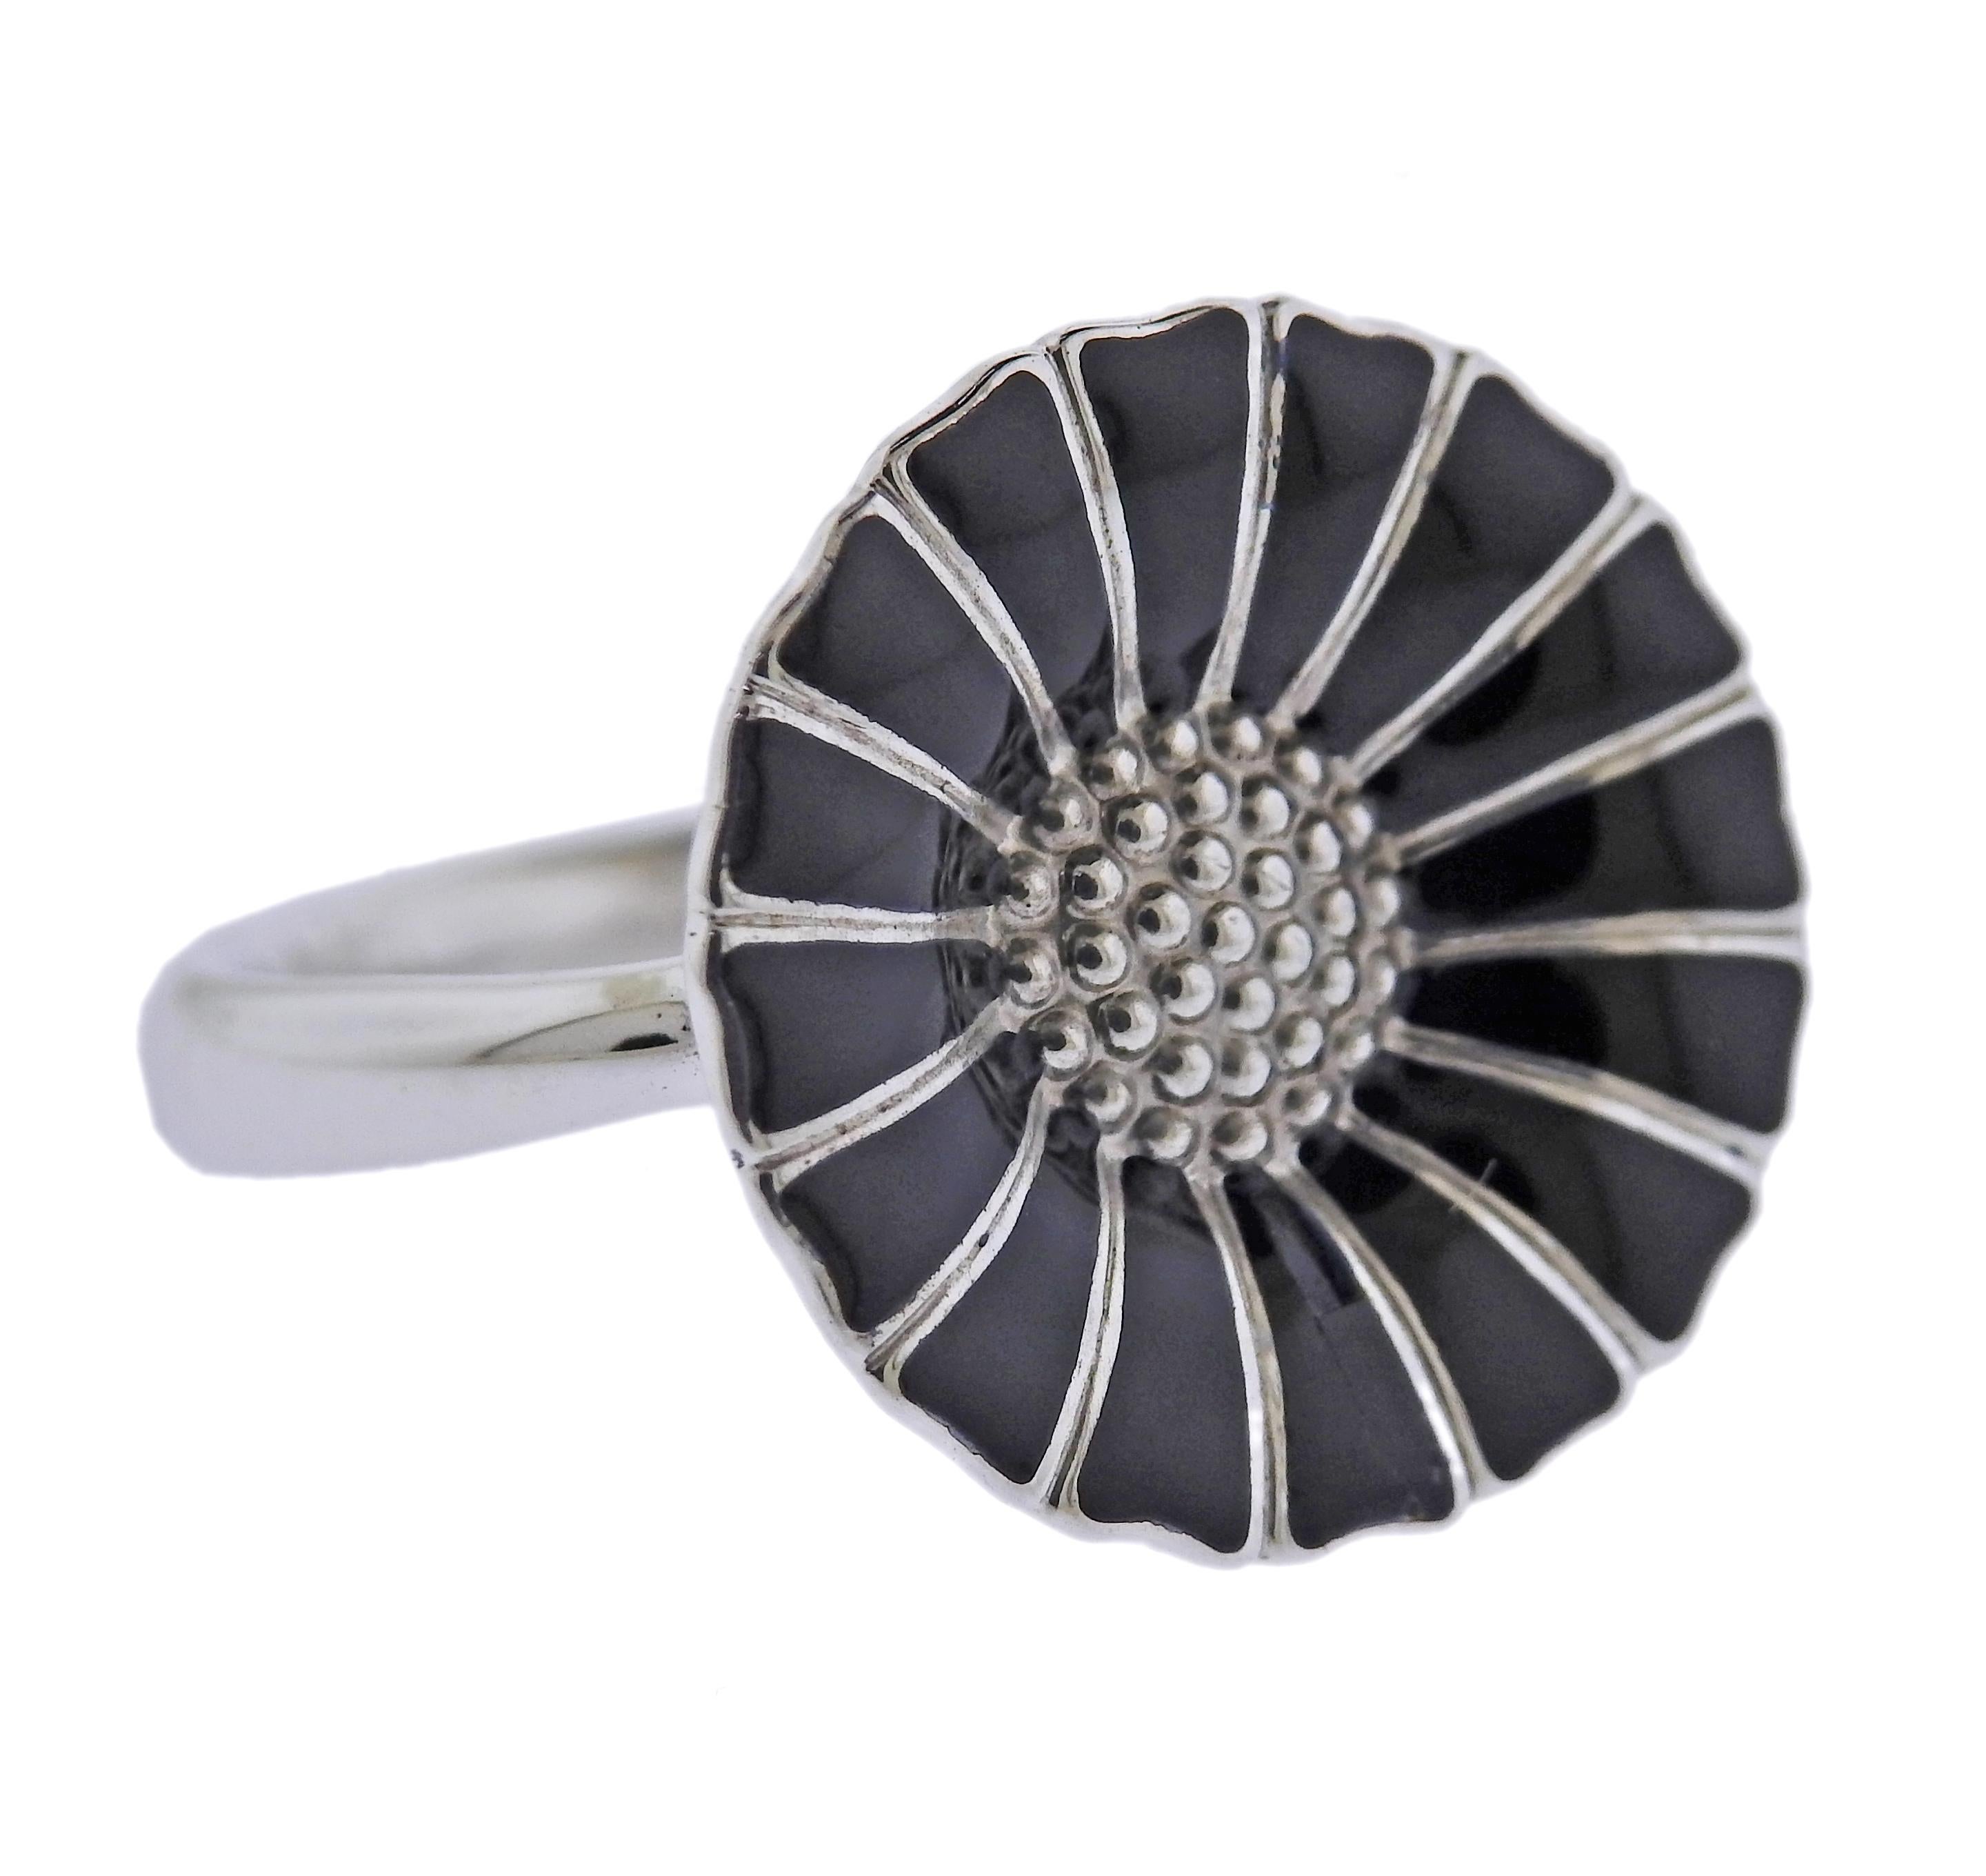 Brand new Georg Jensen sterling silver Daisy flower ring with black enamel. Ring top - 18mm. Available in sizes: 51, 56, 53. Model # 3557600. Marked: GJ mark, 925 S. Weight - 4.3 grams.